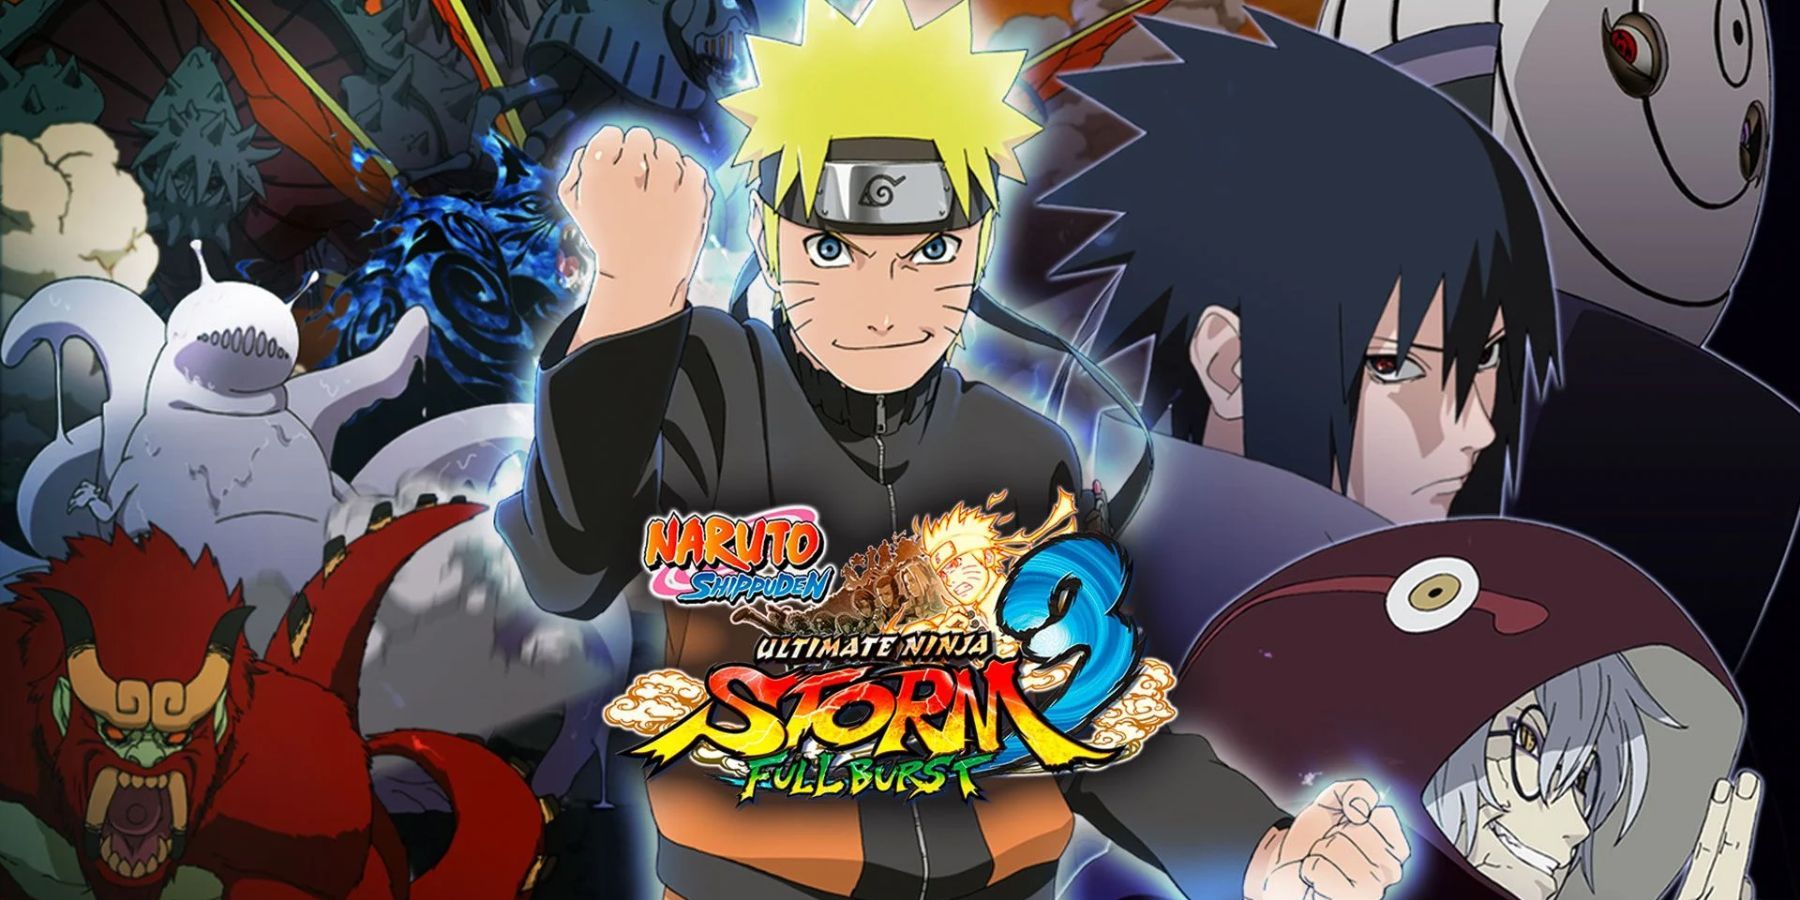 Years Ultimate Ninja Series Naruto: In Most The Ten Remains 3 Storm The Ambitious Later,